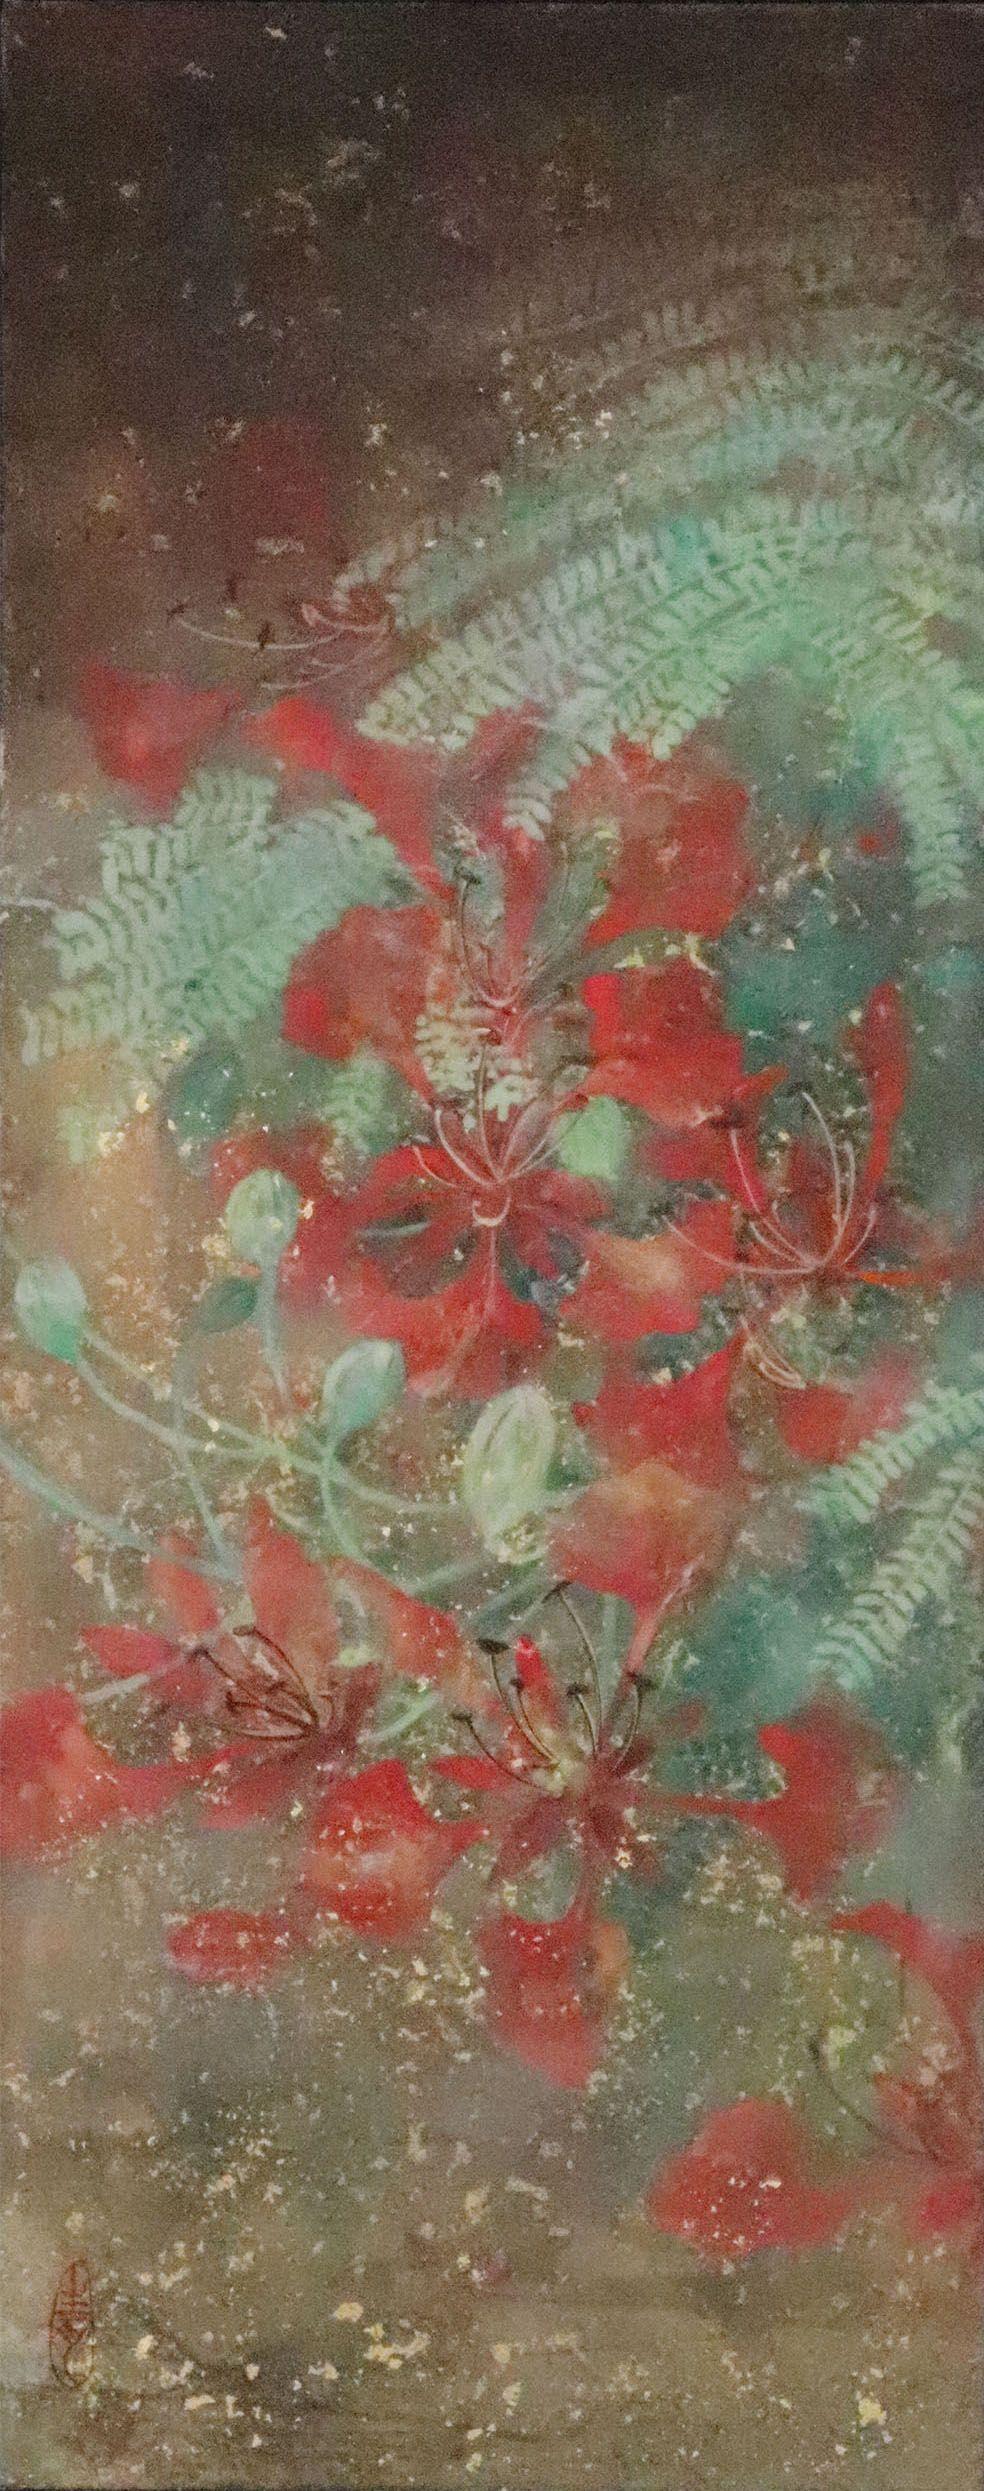 Summer II by Chen Yiching - Contemporary nihonga painting, flowers, nature